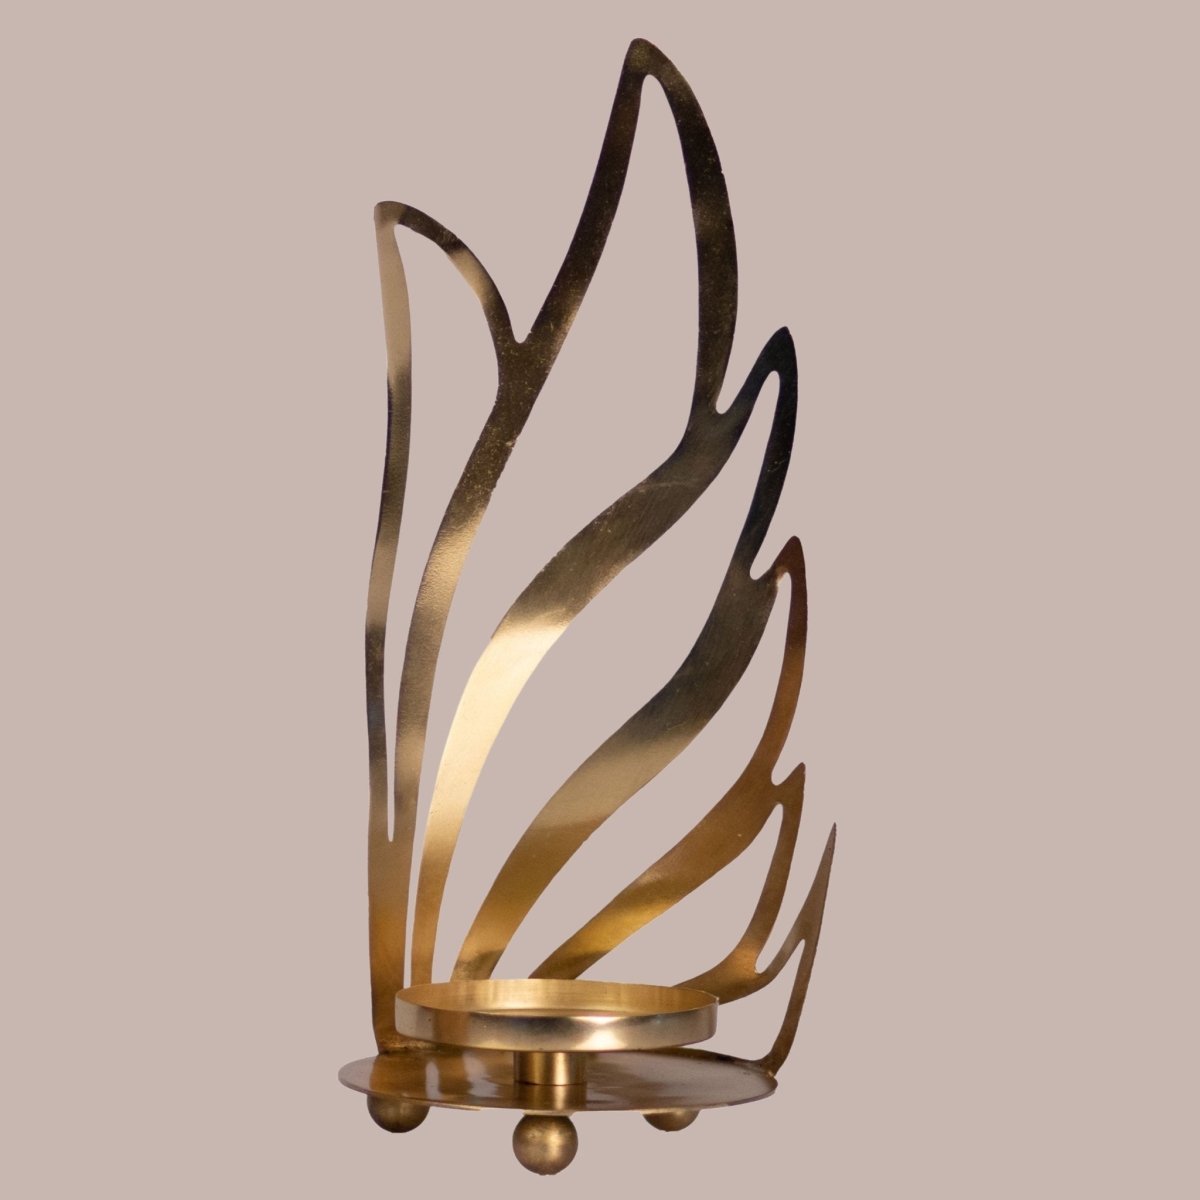 Kezevel Decorative Metal Candle Stand - Artistic Swan Shape Golden Candle Holder for Home Decoration, Table Decor, Room Decor